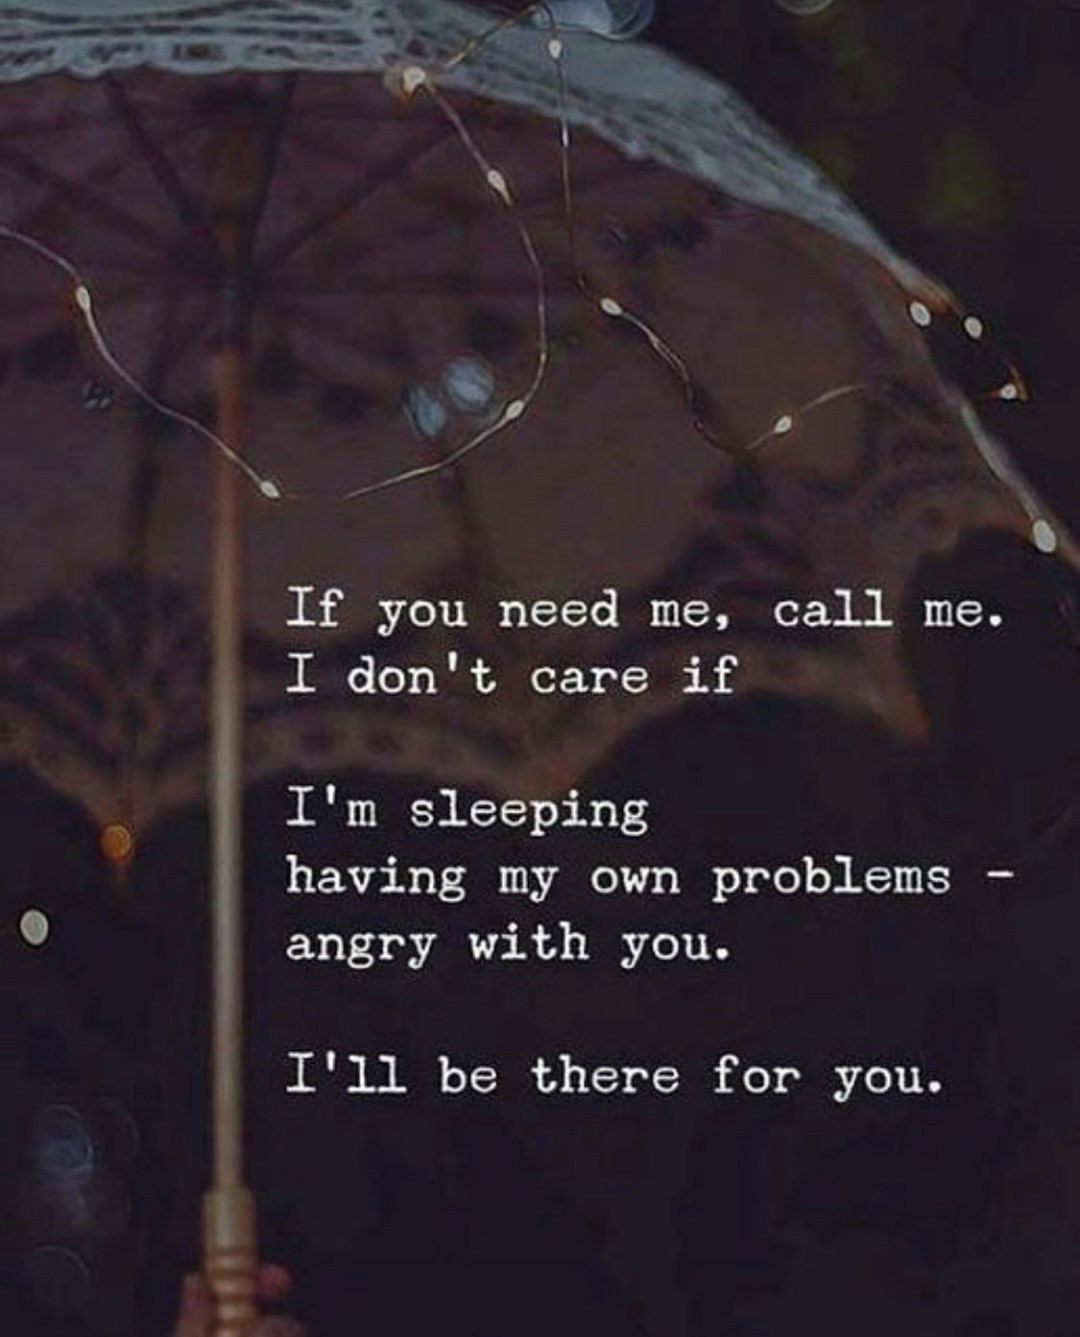 If you need me, call me. I don't care if. I'm sleeping having my own problems angry with you. I'll be there for you.